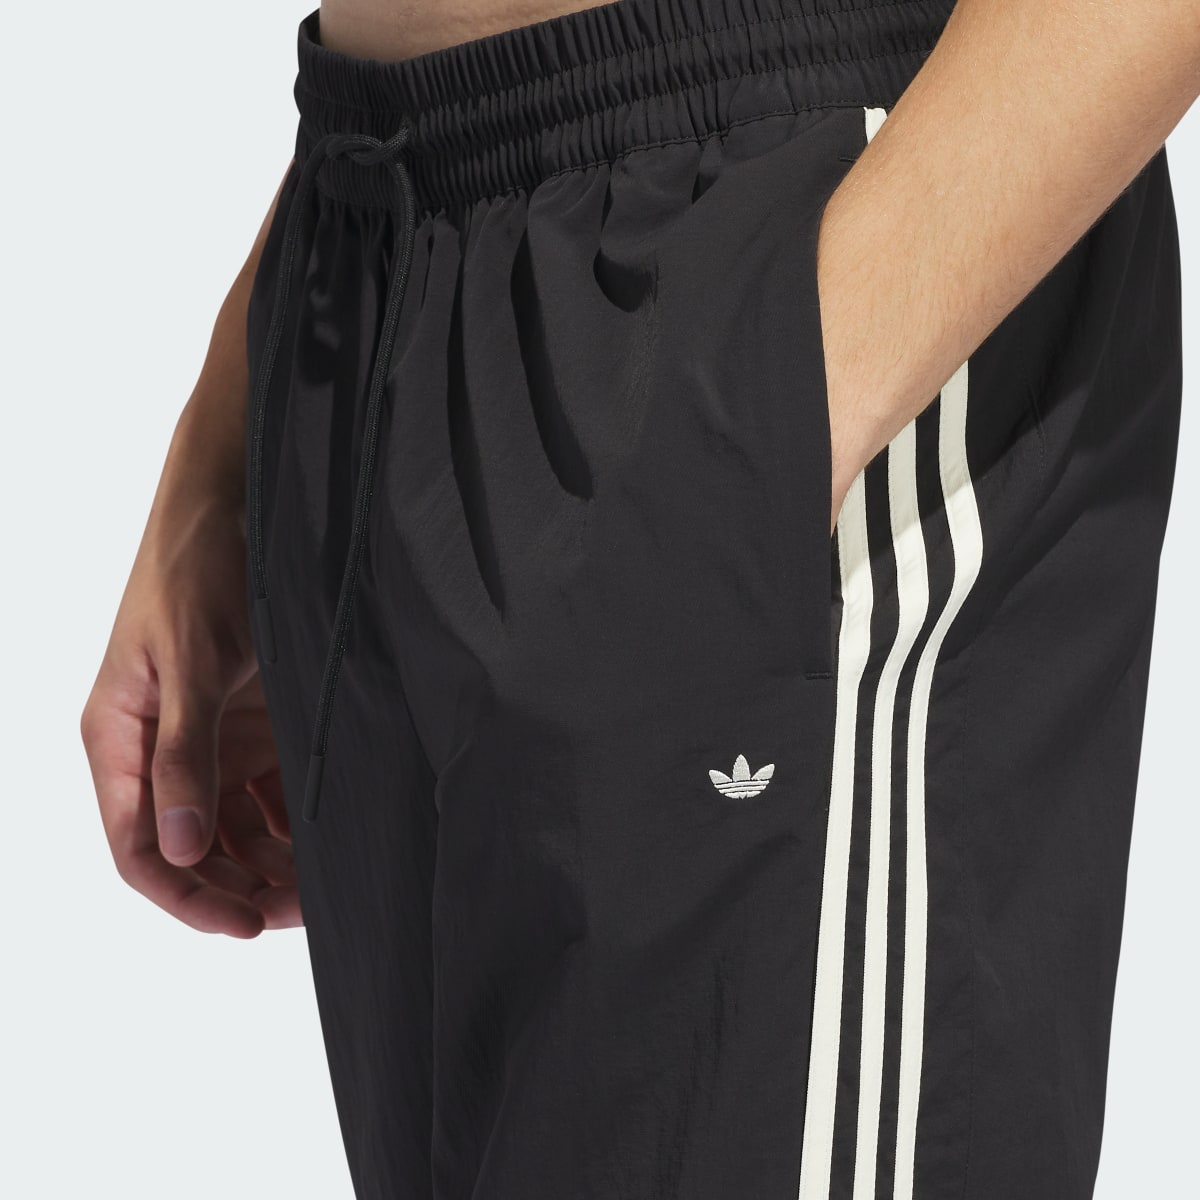 Adidas Basketball Track Suit Pants (Gender Neutral). 5